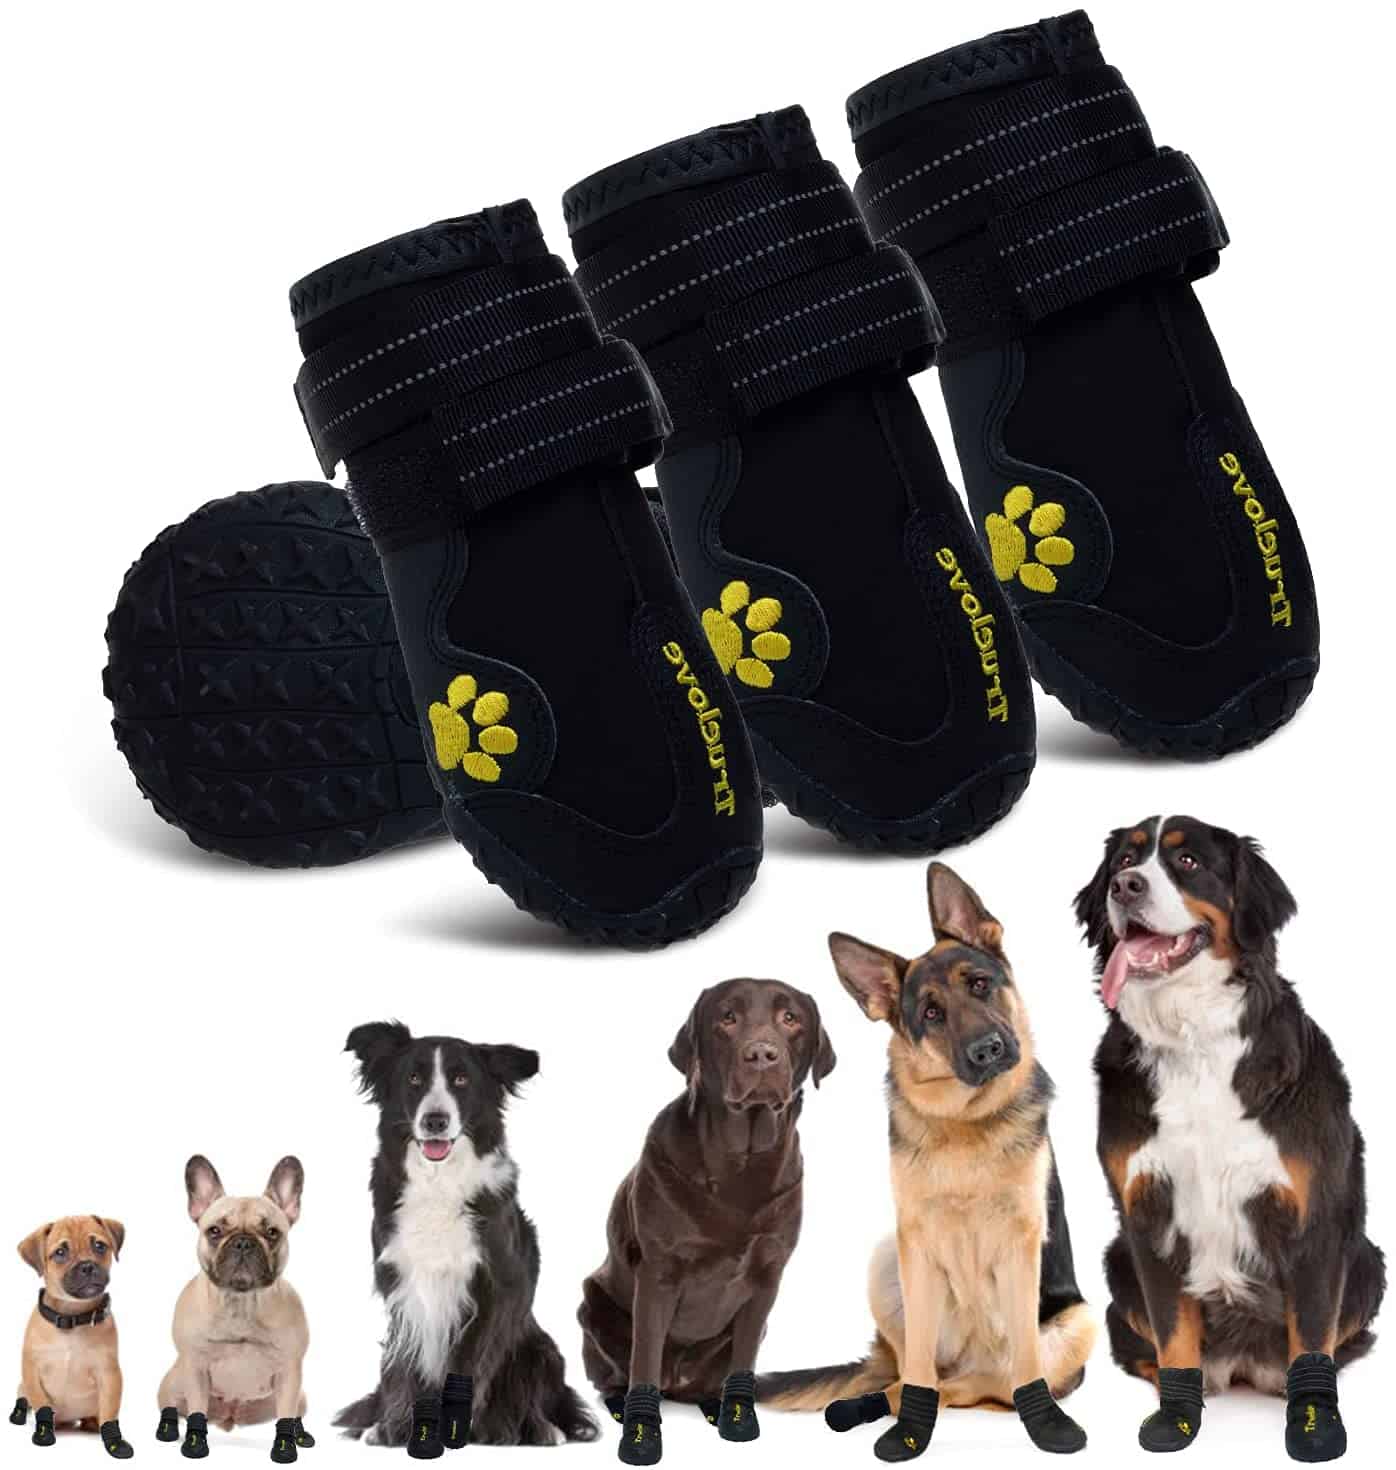 1. Best Overall — EXPAWLORER Waterproof Dog Shoes